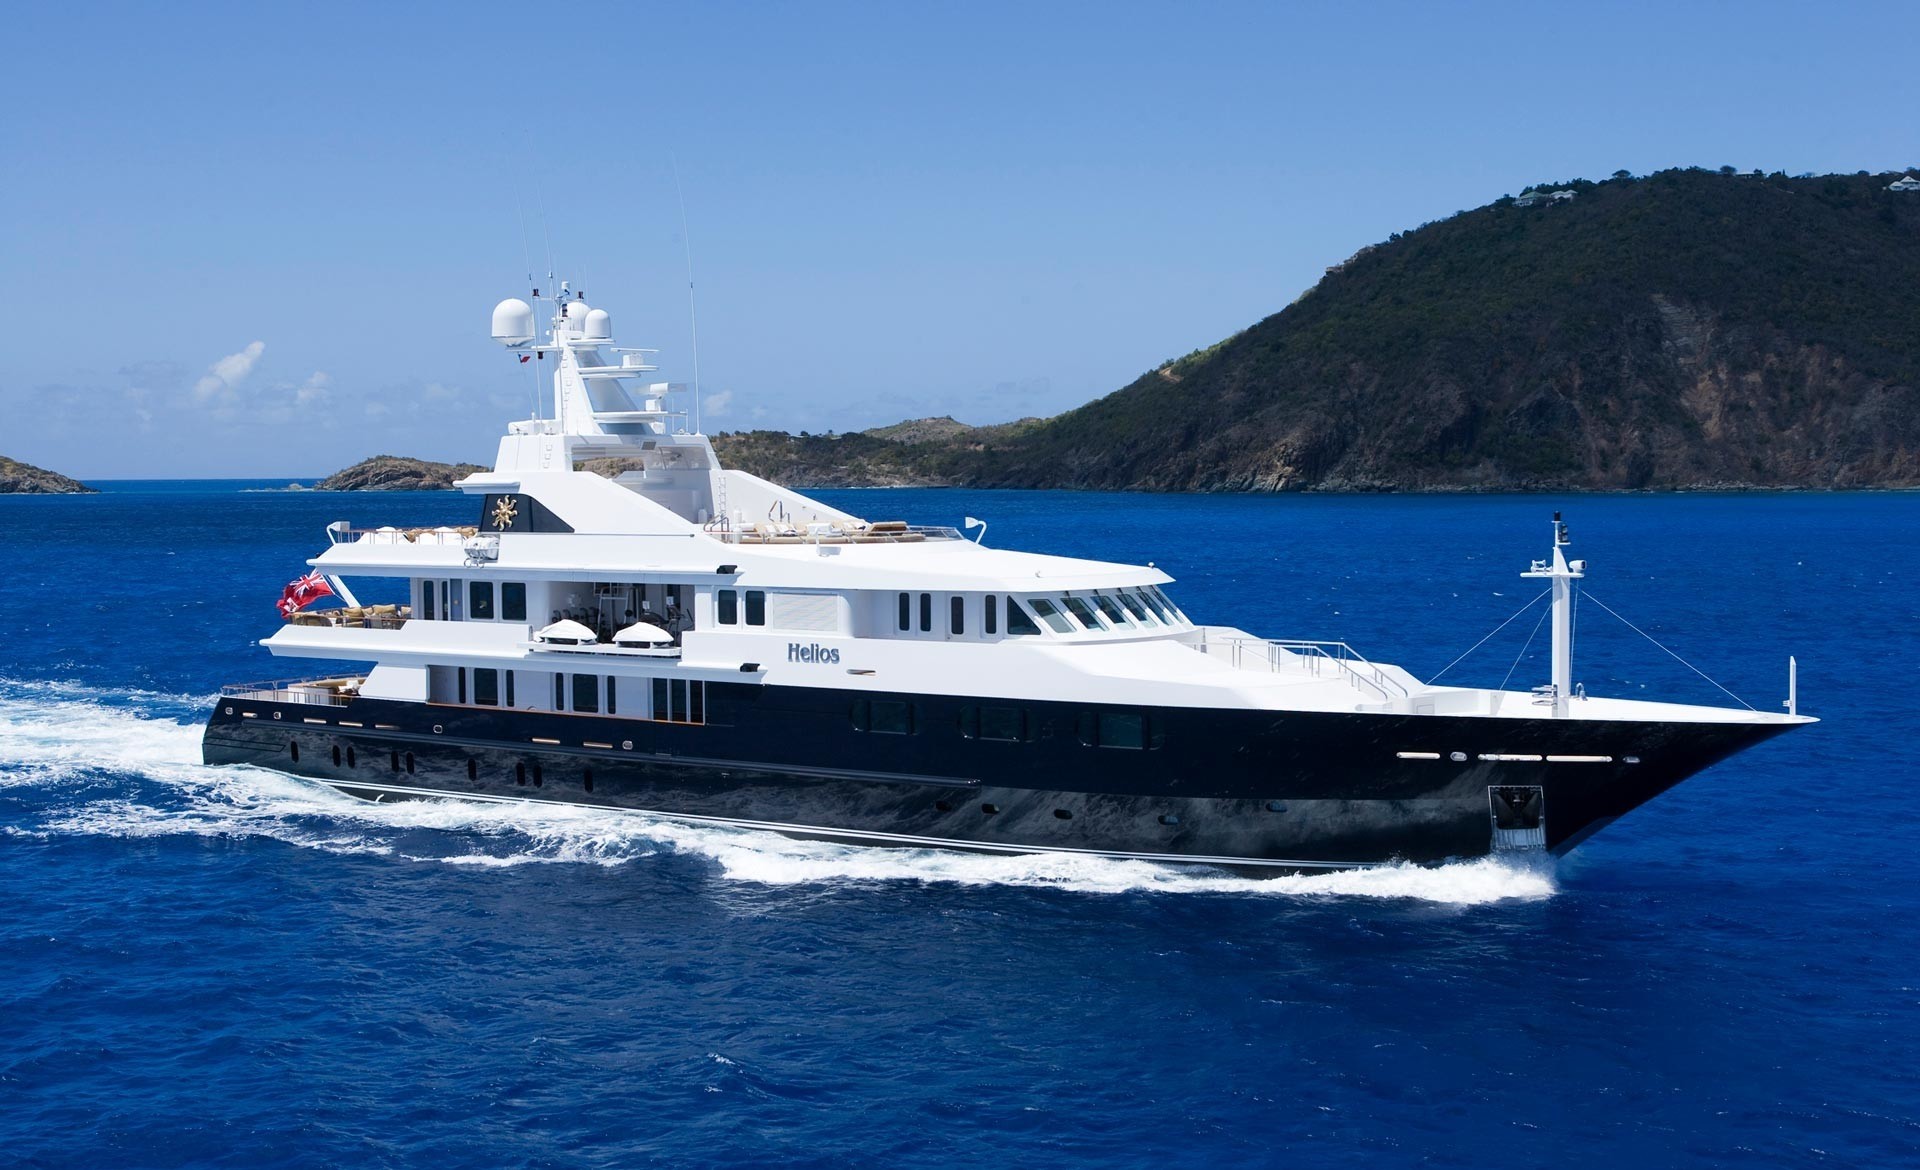 who owns helios yacht